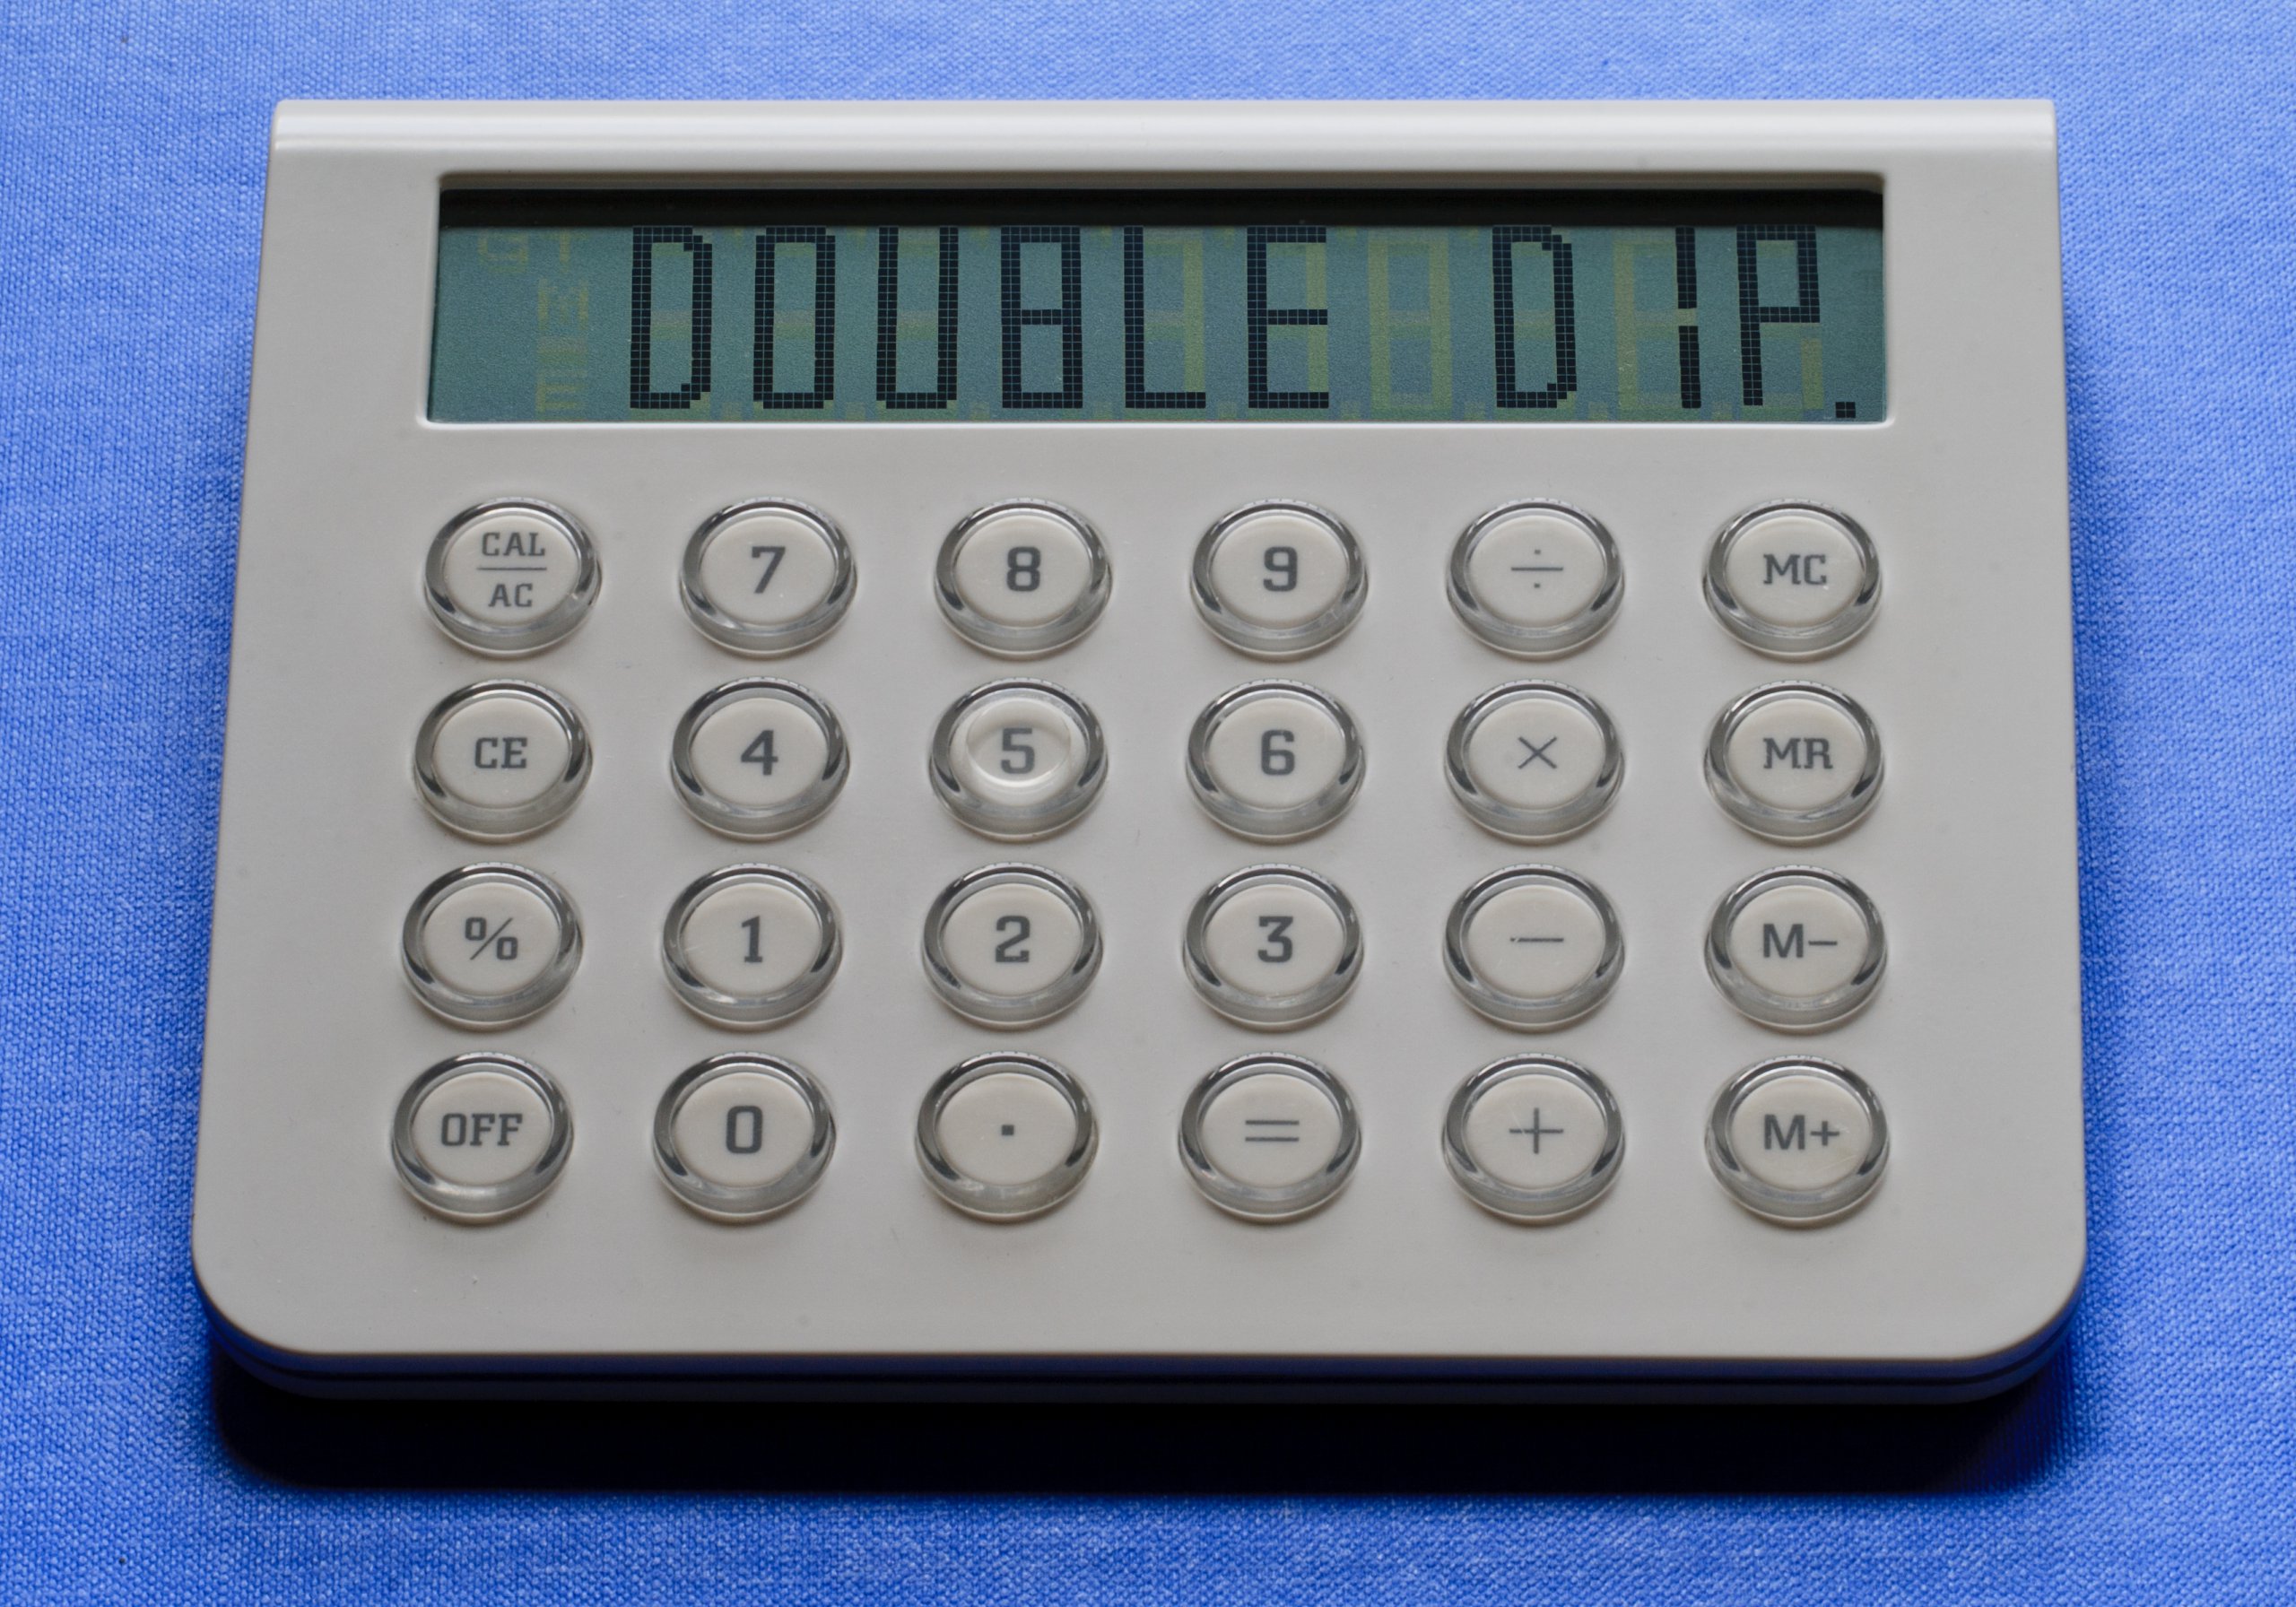 Double-dip Recession - Complete Controller